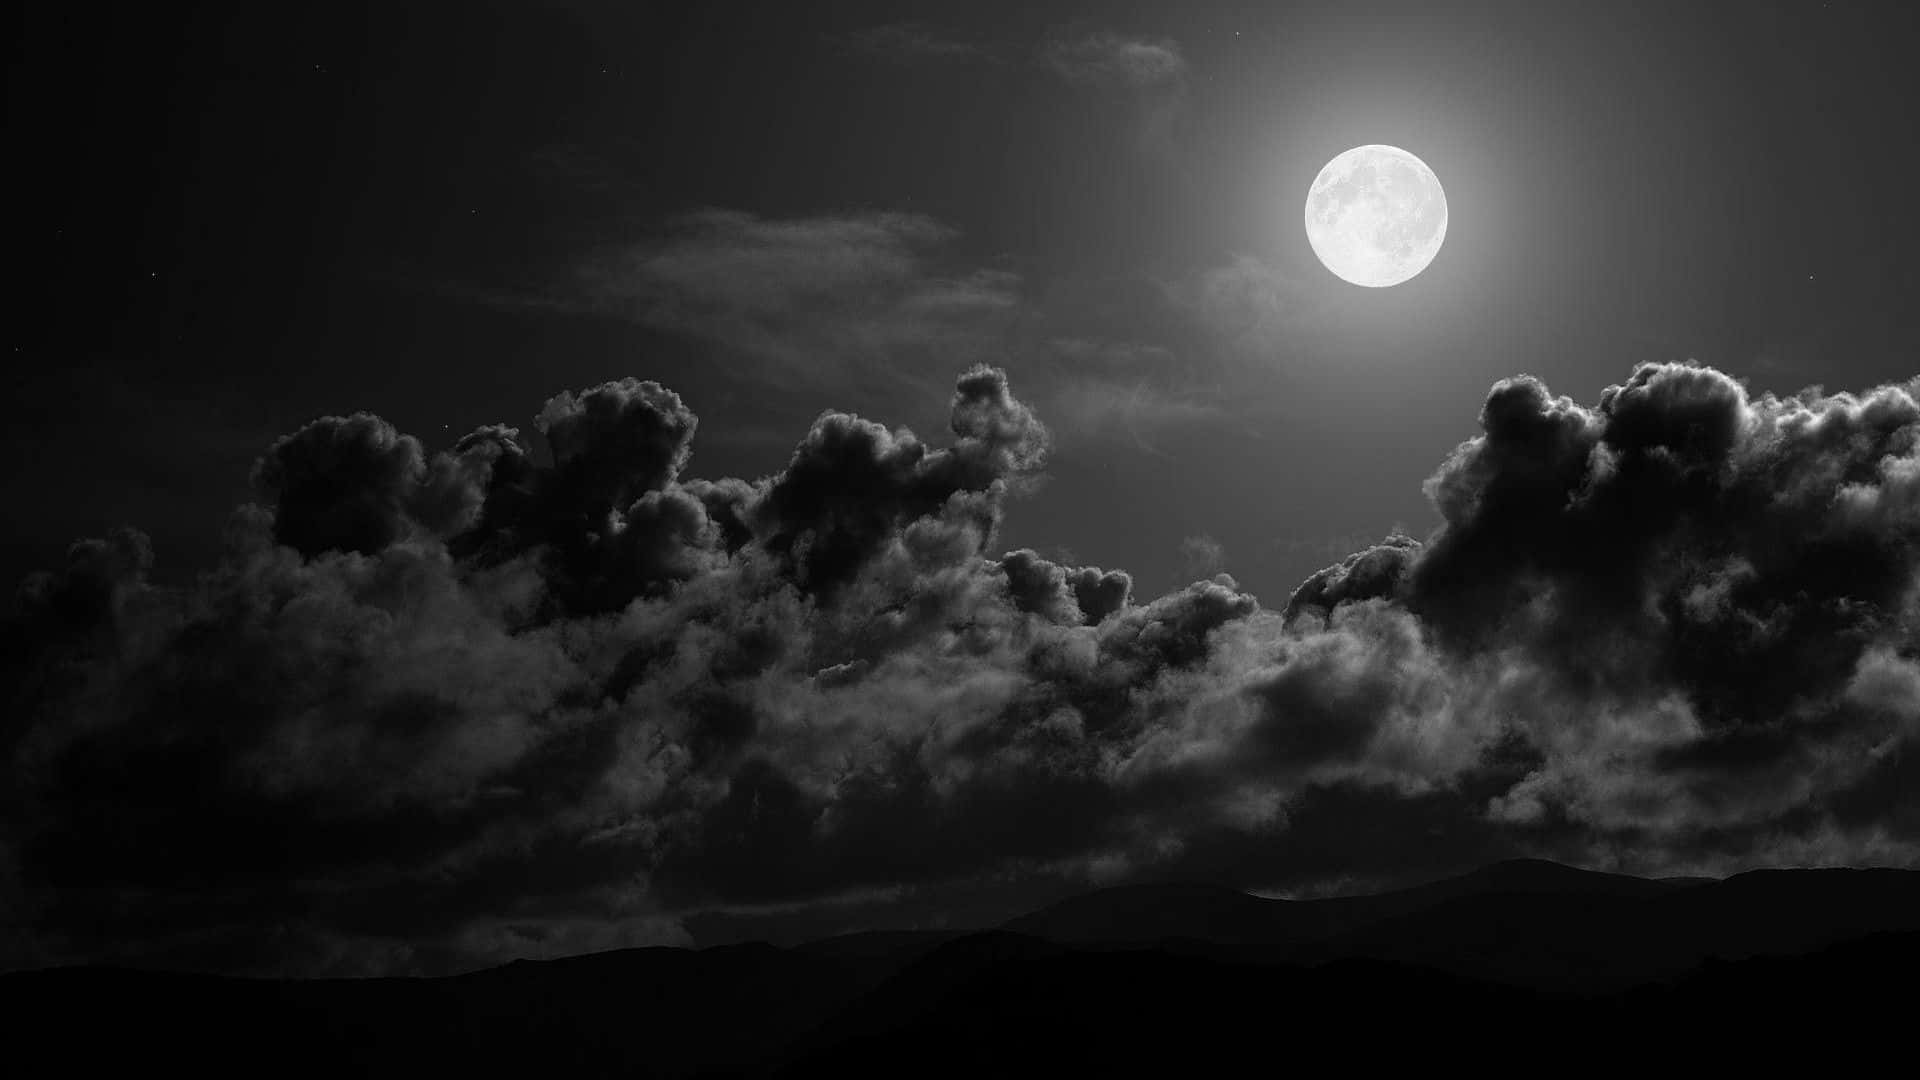 Dramatic Black and White Sky Wallpaper